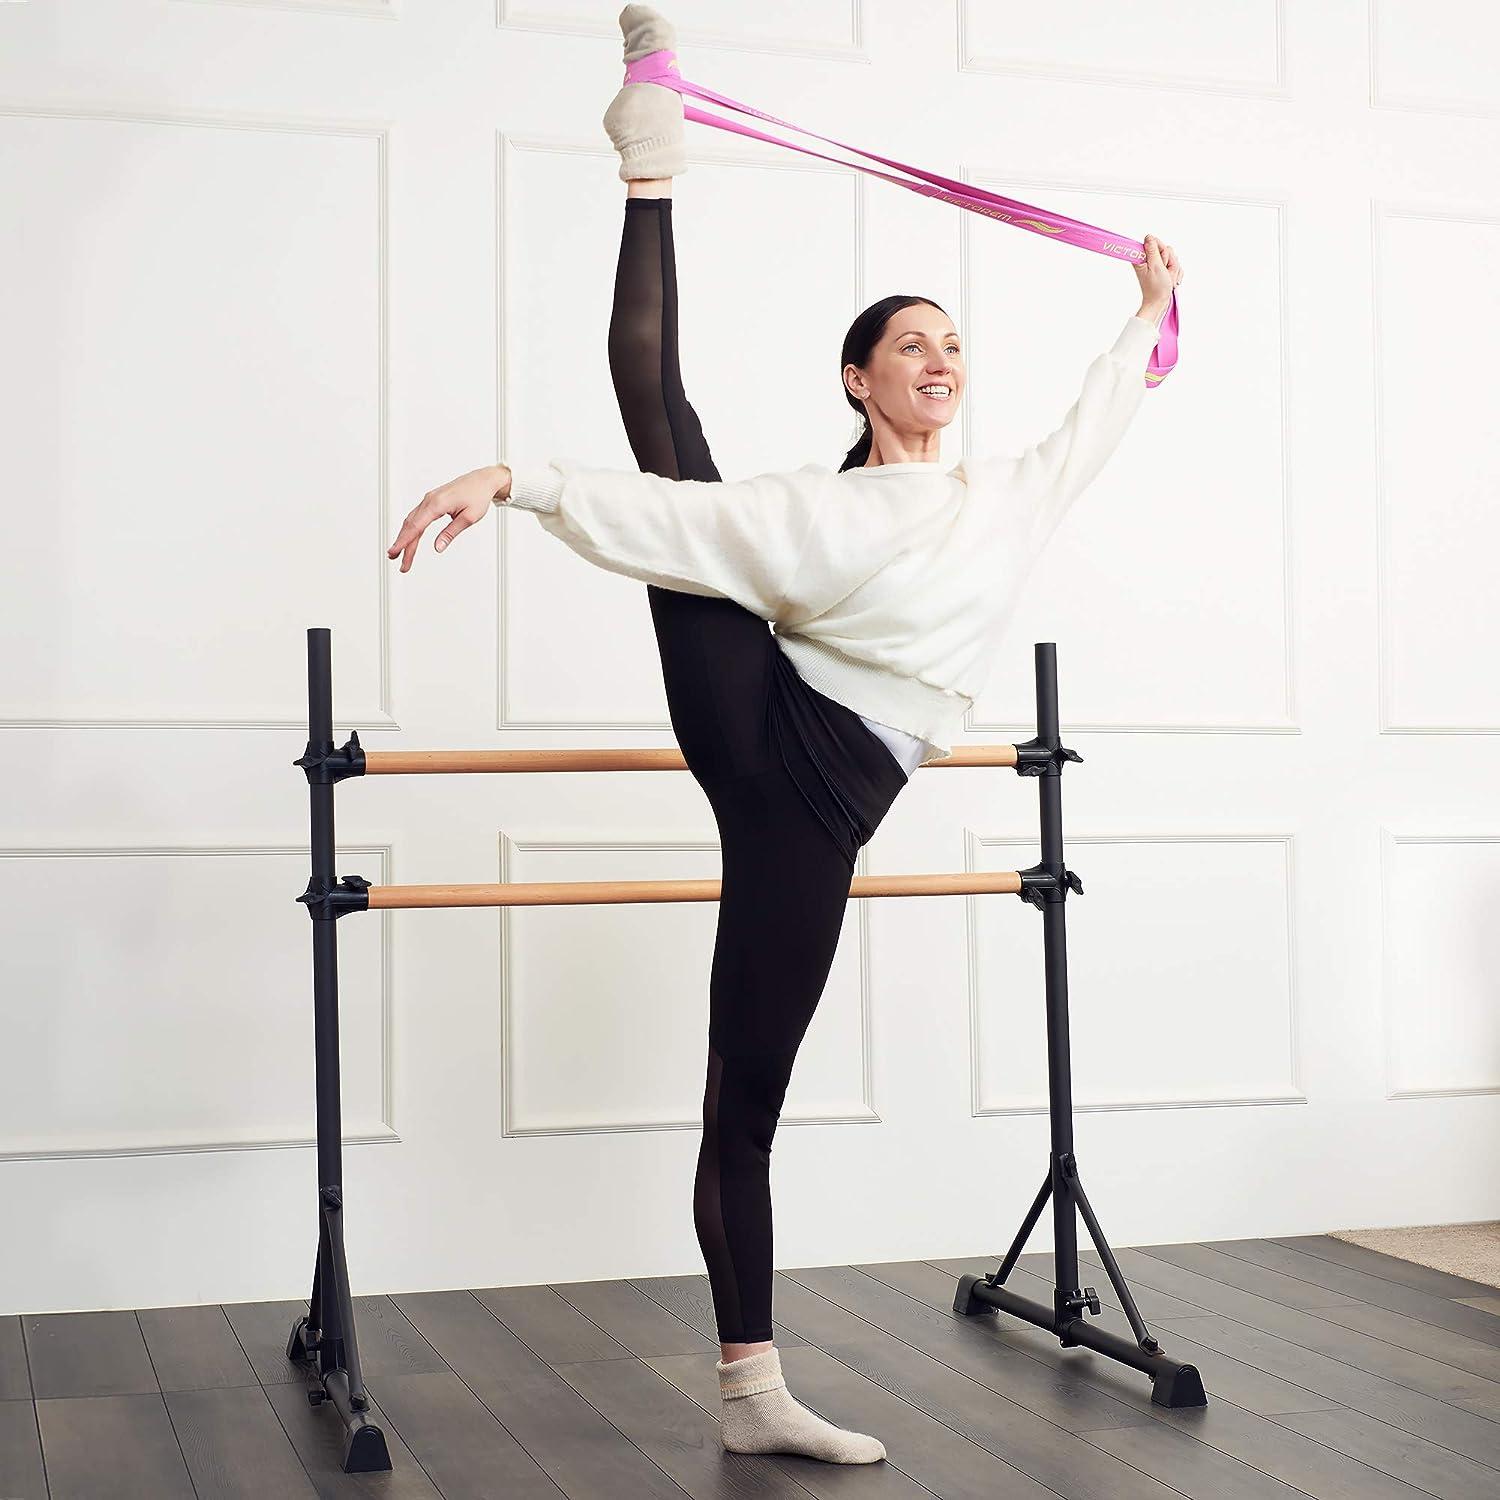 5-Foot Adjustable Portable Ballet Barre for Home Use